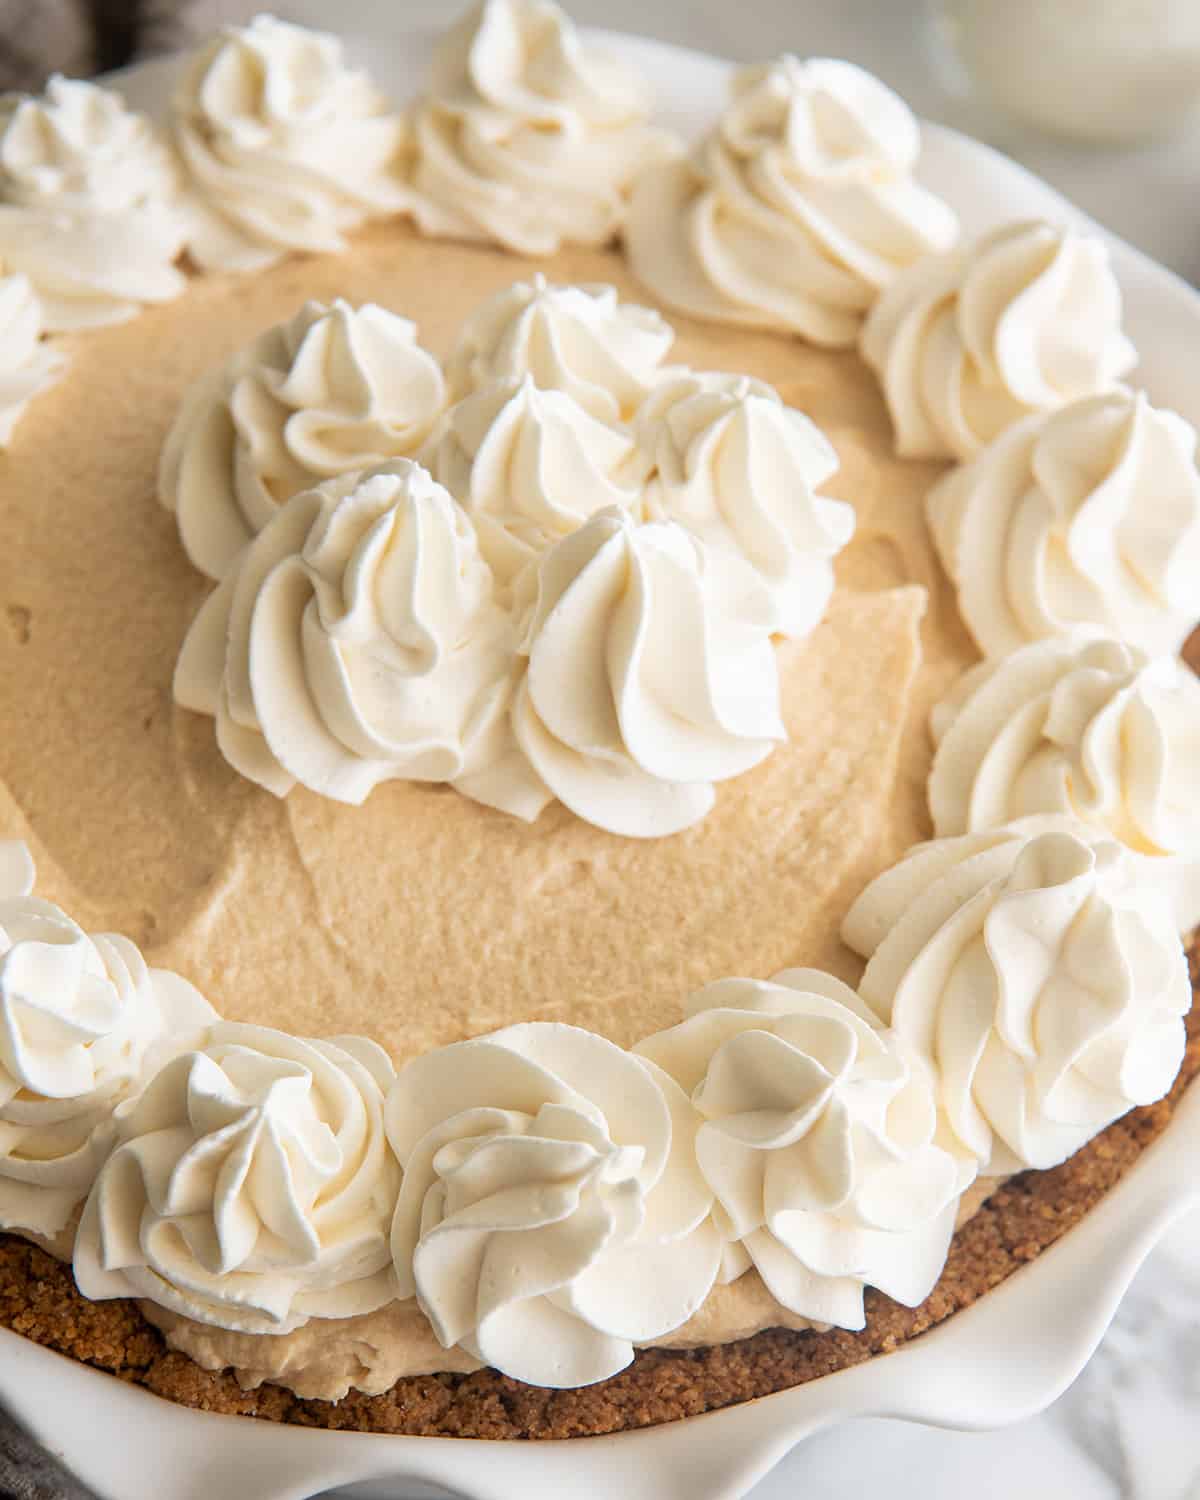 No-Bake Peanut Butter Pie topped with whipped cream